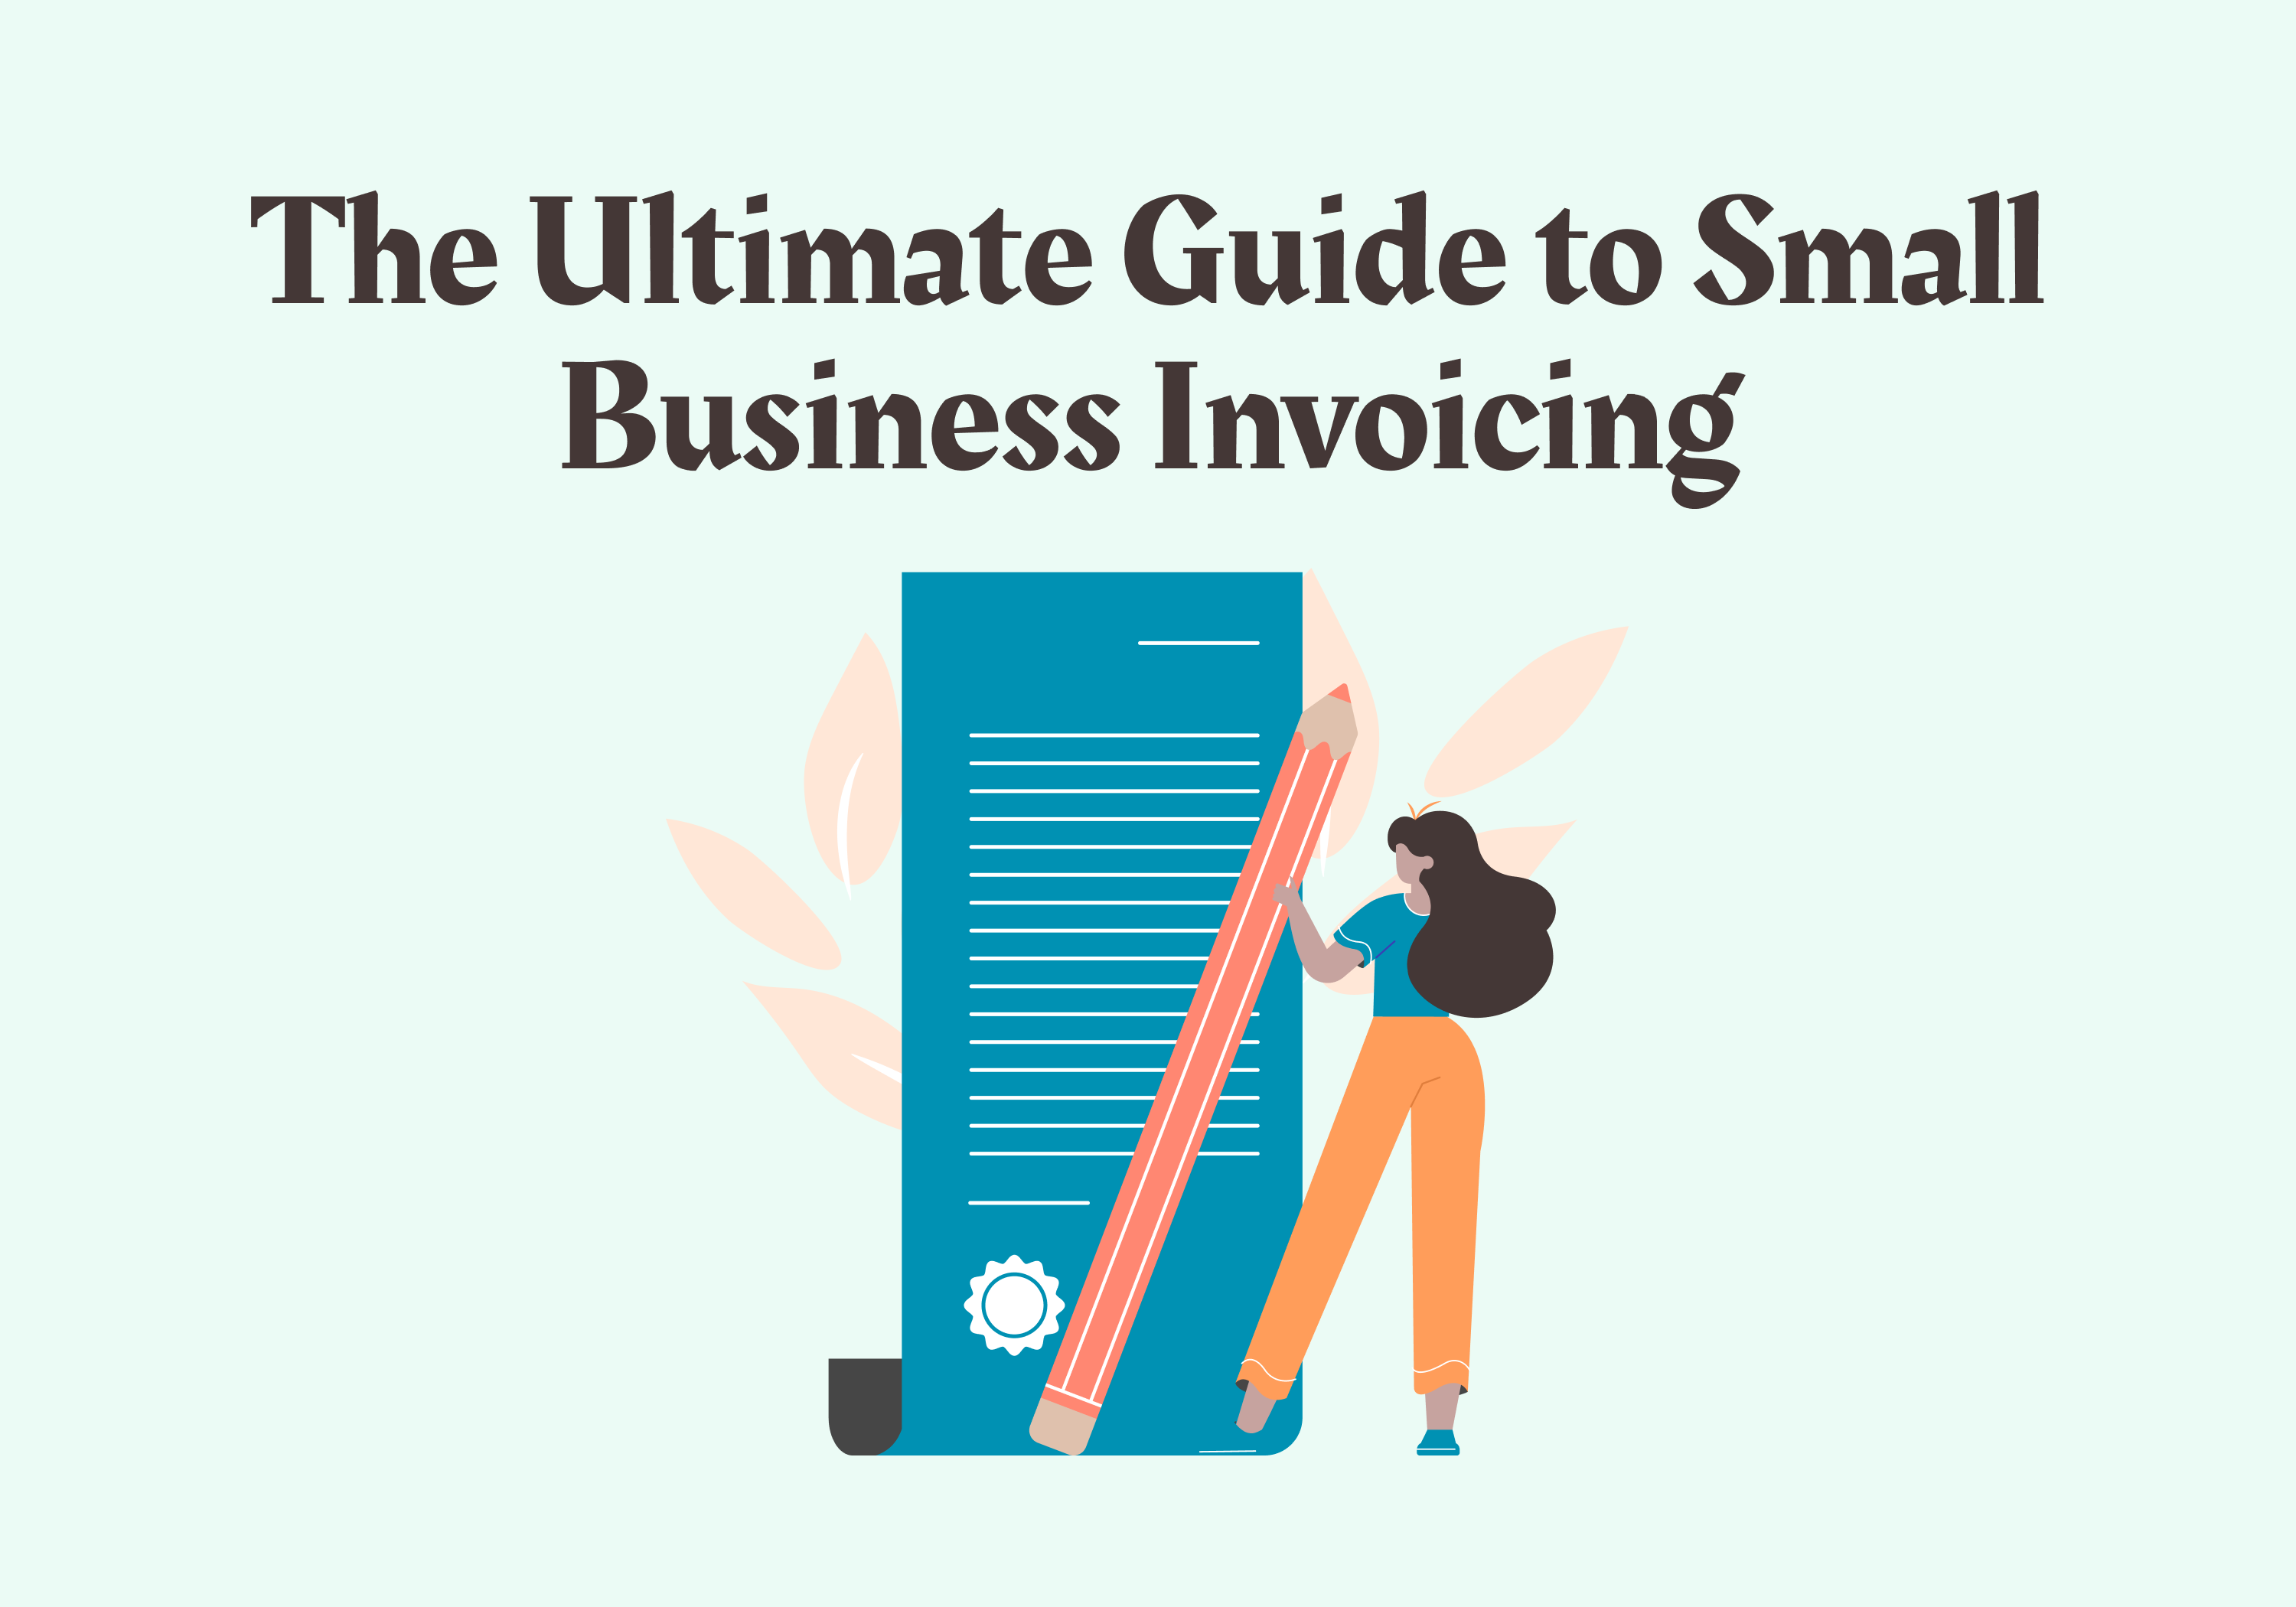 The Ultimate Guide to Small Business Invoicing